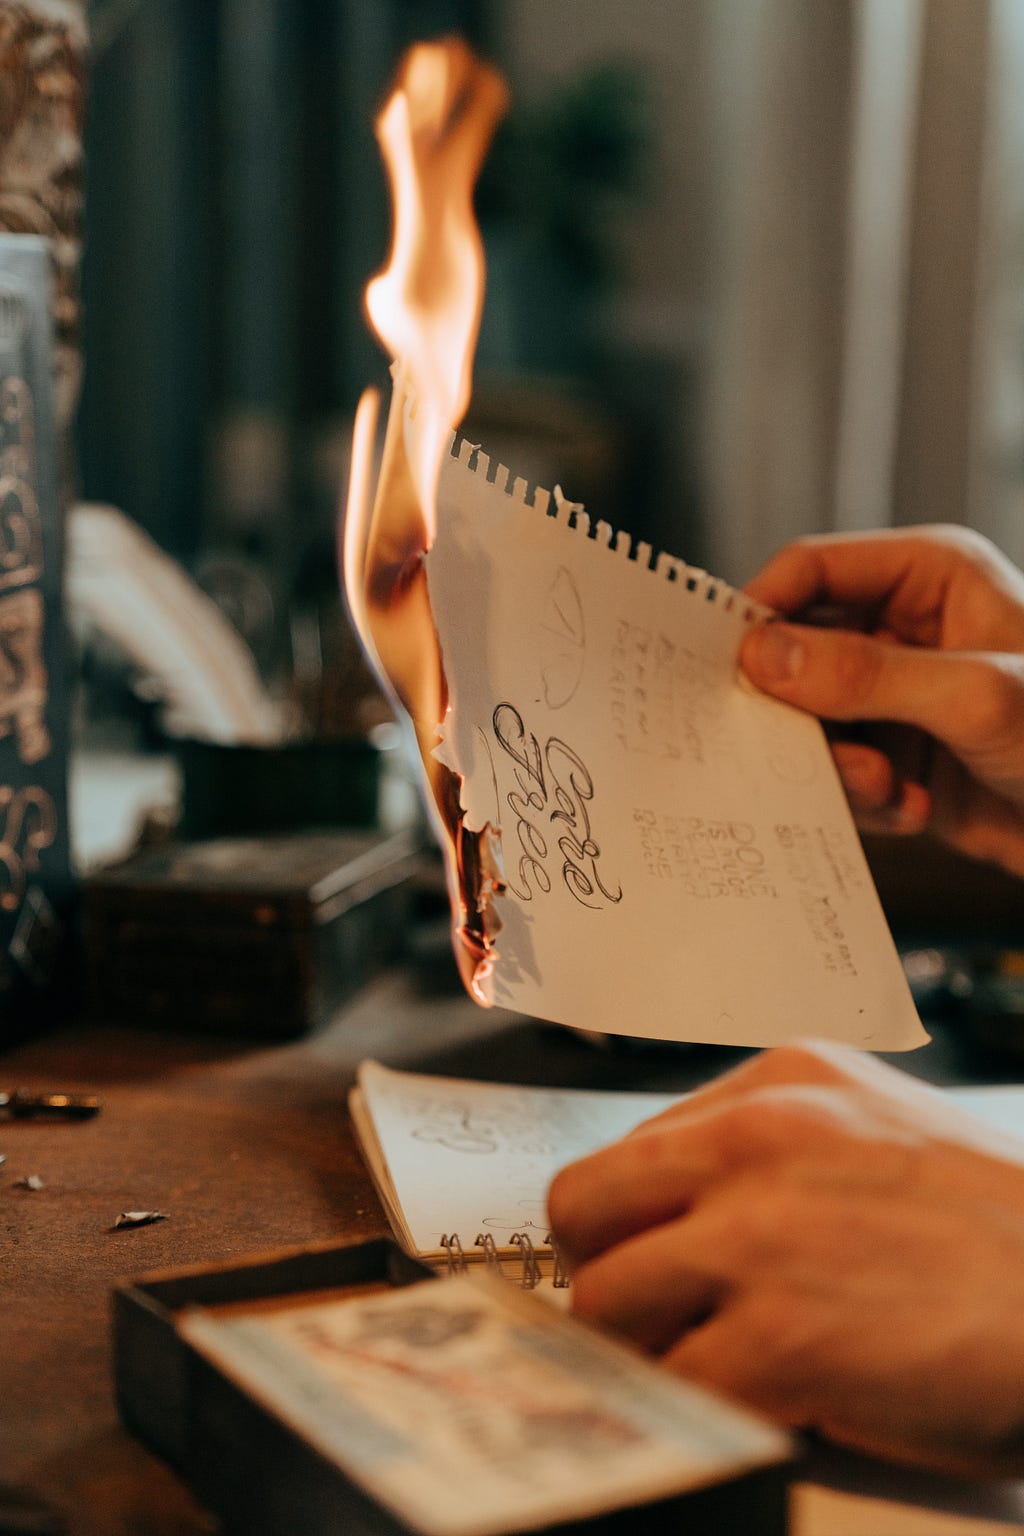 A person’s hand holding a diary page with some text on it, the paper is burning at one end